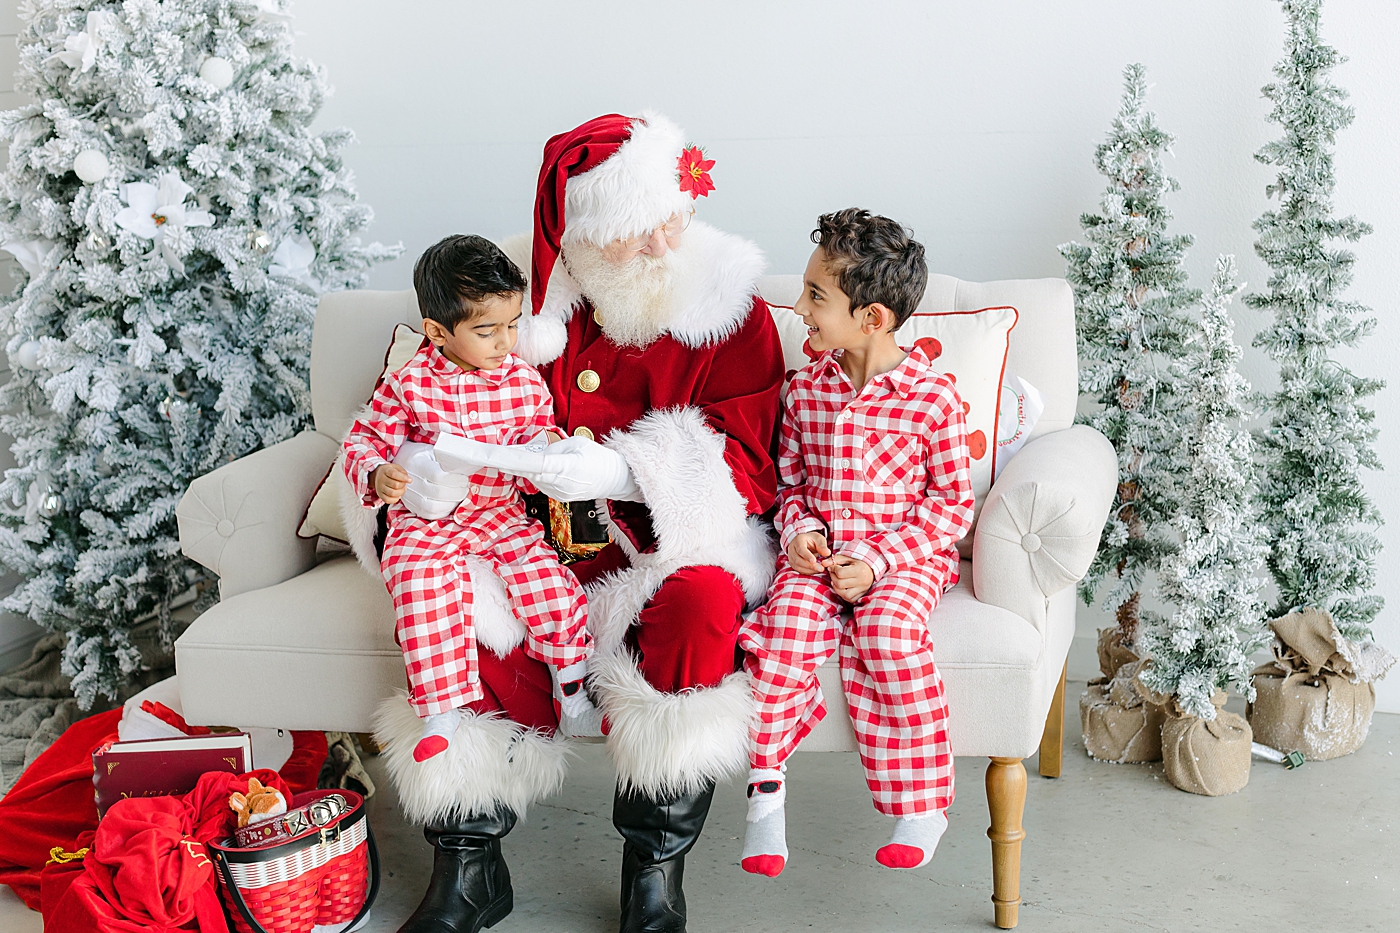 Brothers sitting with Santa on a white sofa | Images by Sana Ahmed Photography